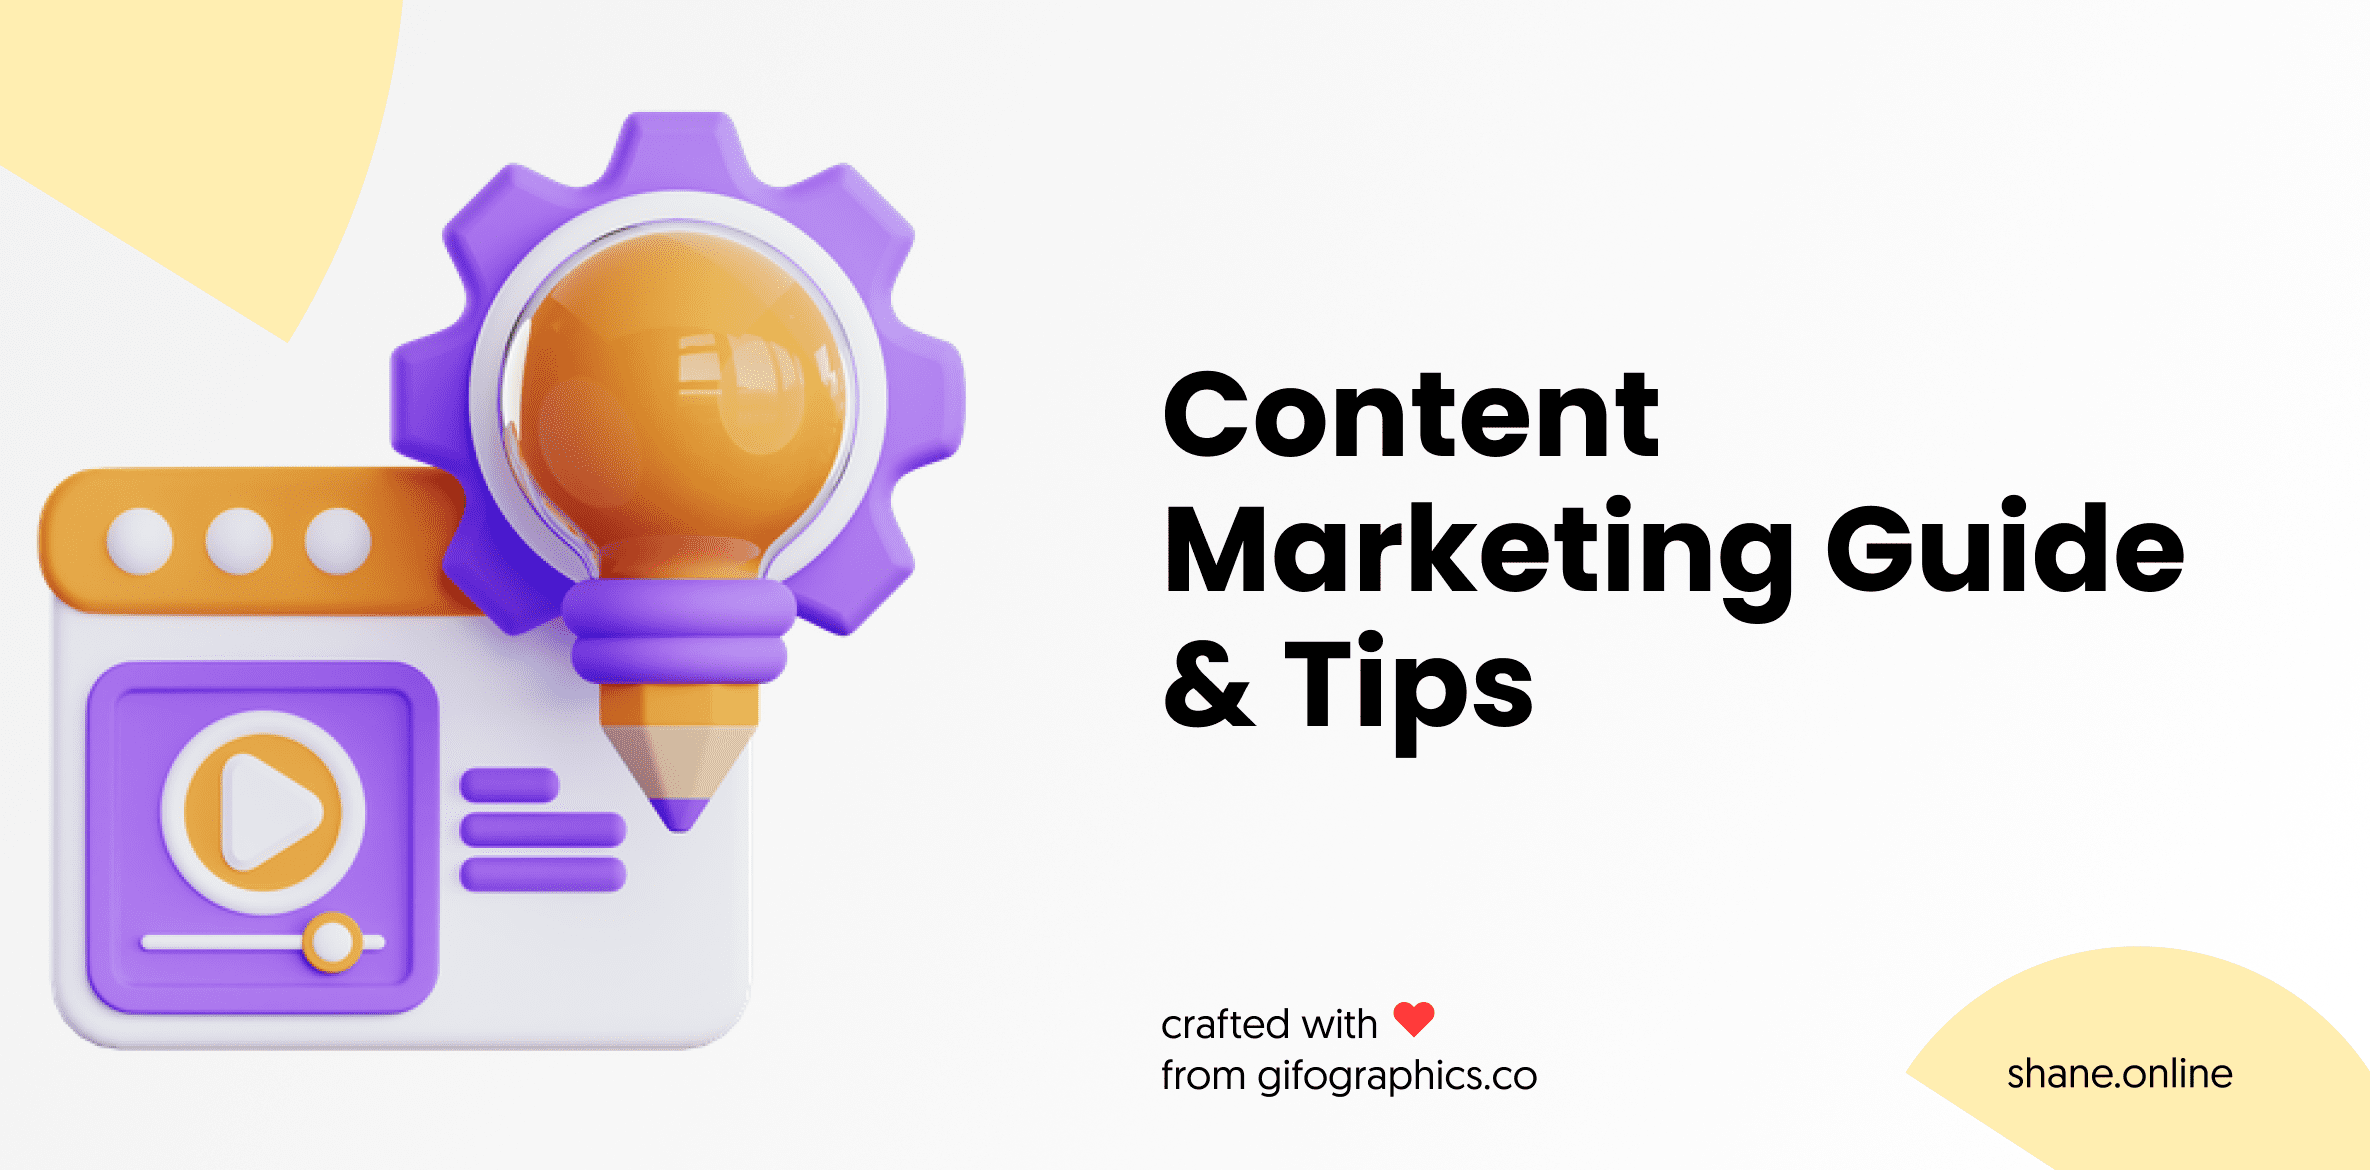 Content Marketing Guide & Tips